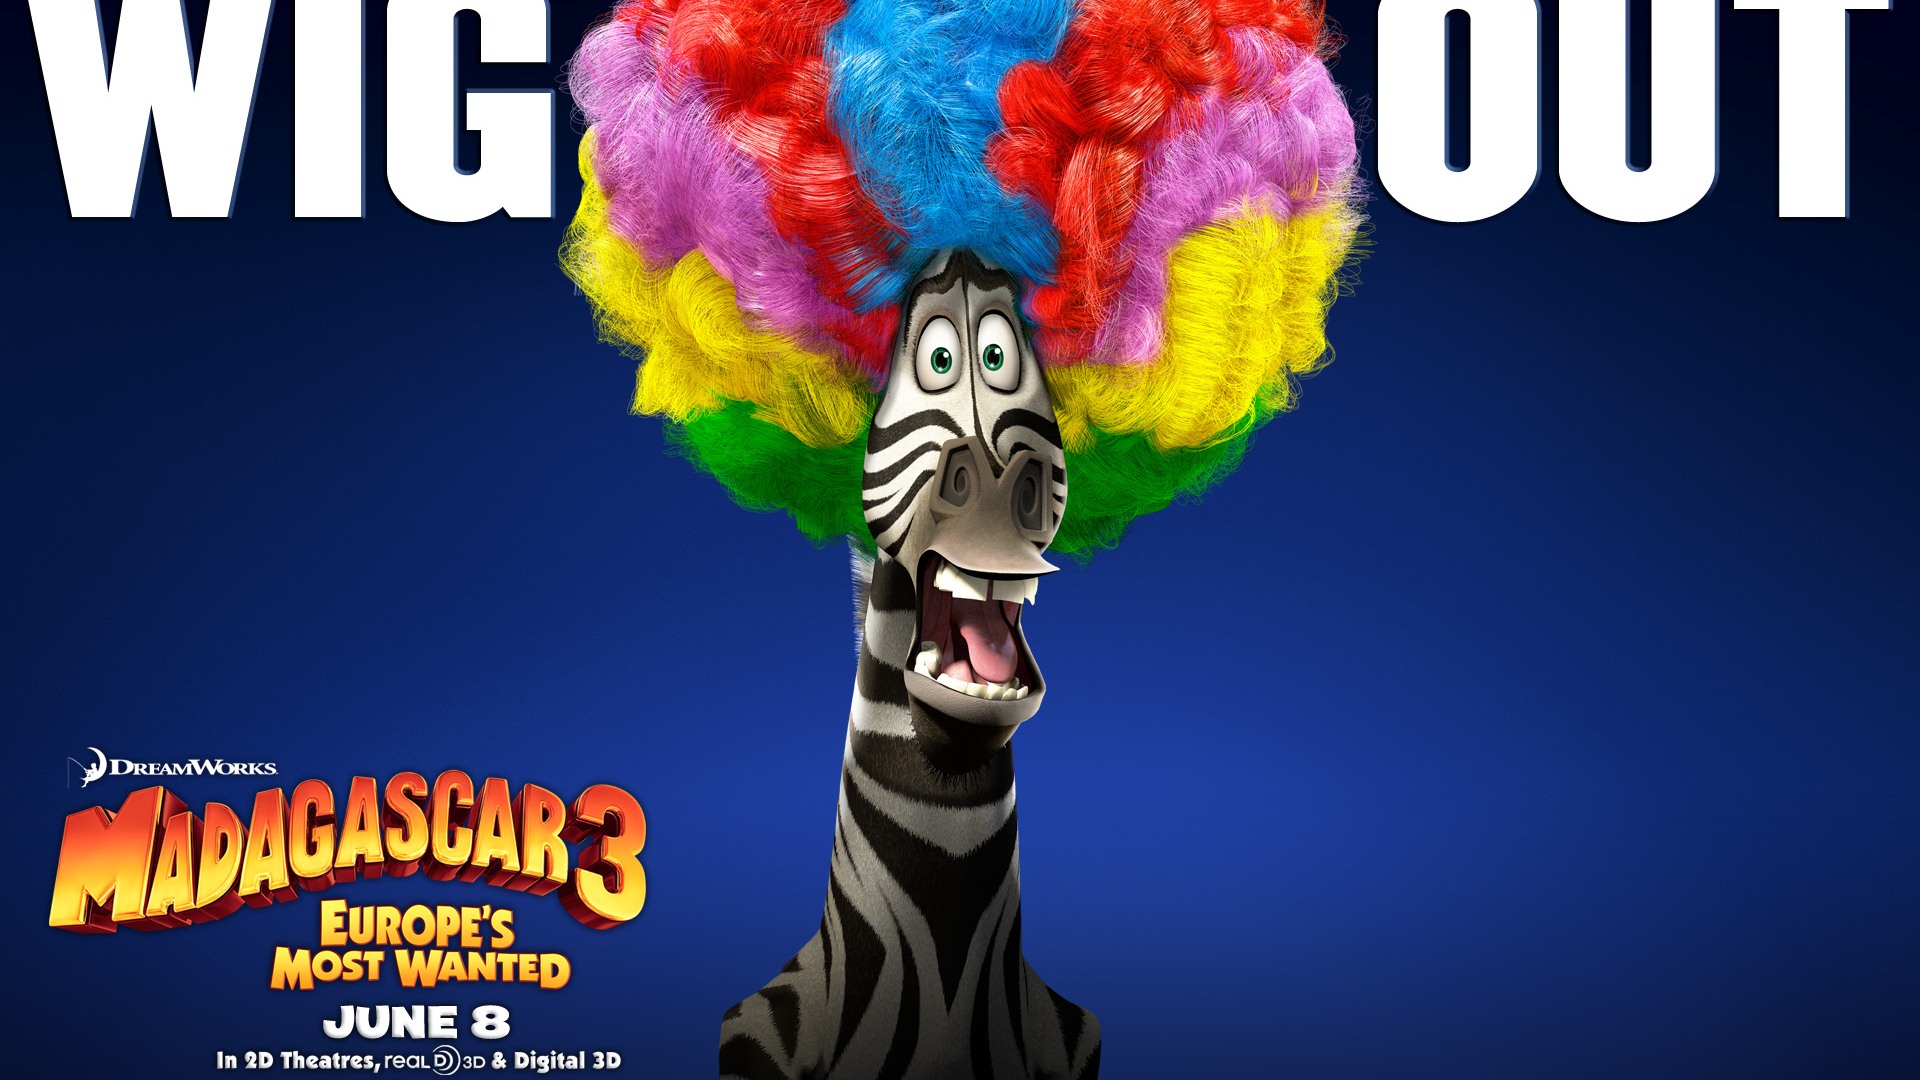 Madagascar 3: Europe's Most Wanted HD wallpapers #13 - 1920x1080